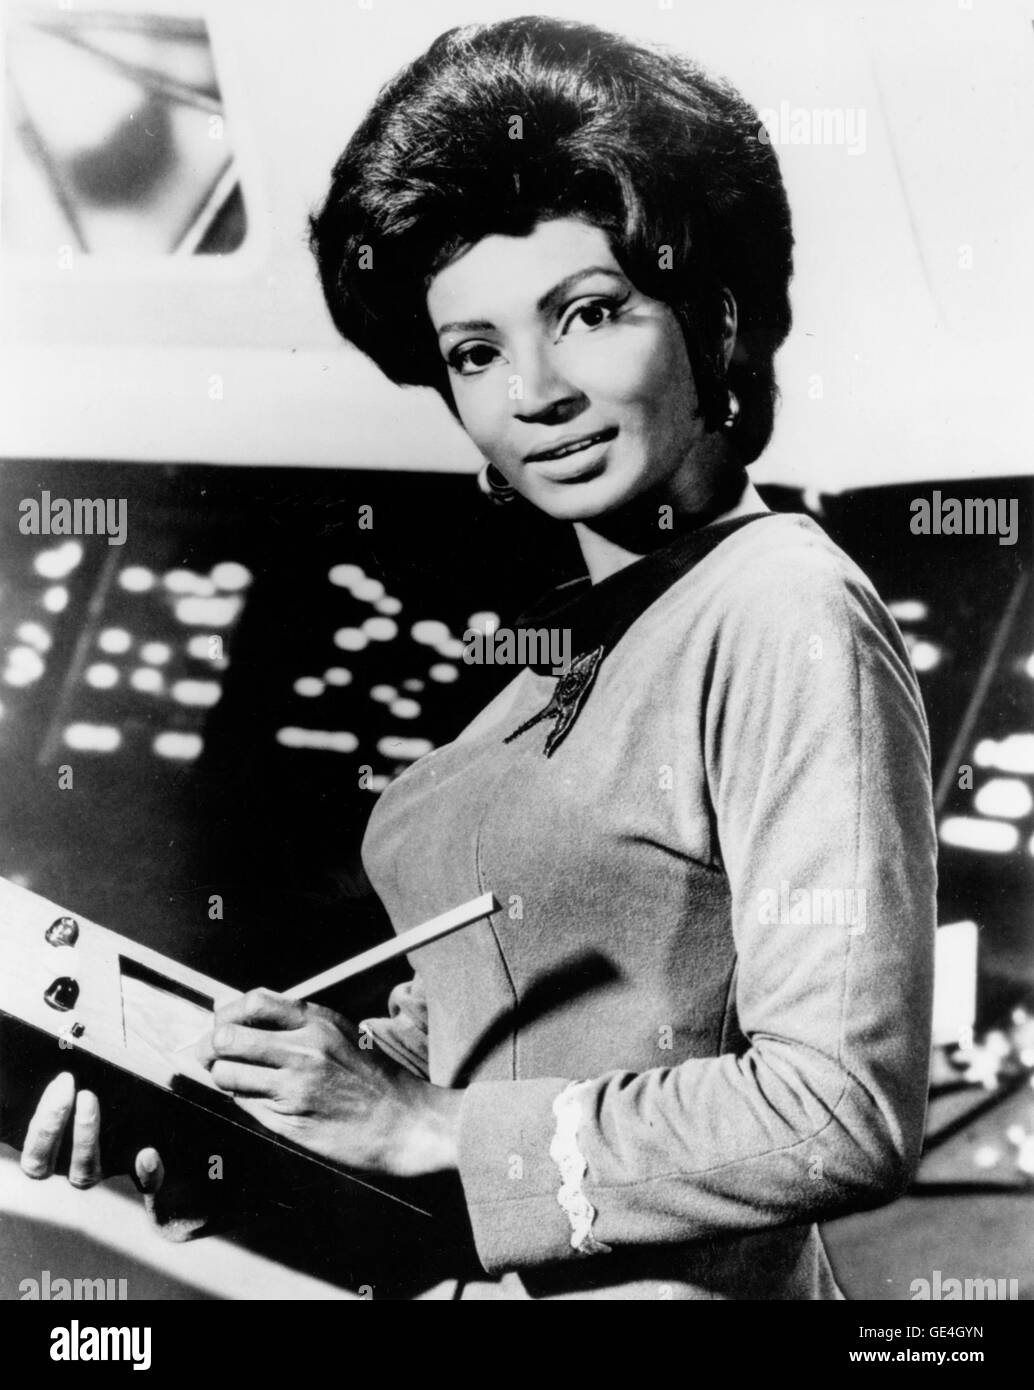 (March 24, 1977) Actress Nichelle Nichols was born in Robbins, Illinois on December 29, 1936. She played Lieutenant Uhura the Communications Officer on the U.S.S. Enterprise in the original series, Star Trek. Nichols stayed with the show and has appeared in six Star Trek movies. Her portrayal of Uhura on Star Trek marked one of the first non-stereotypical roles assigned to an African-American actress. She also provided the voice for Lt. Uhura on the Star Trek animated series in 1974-75. Before joining the crew on Star Trek, she sang and danced with Duke Ellington's band. Nichols was always int Stock Photo